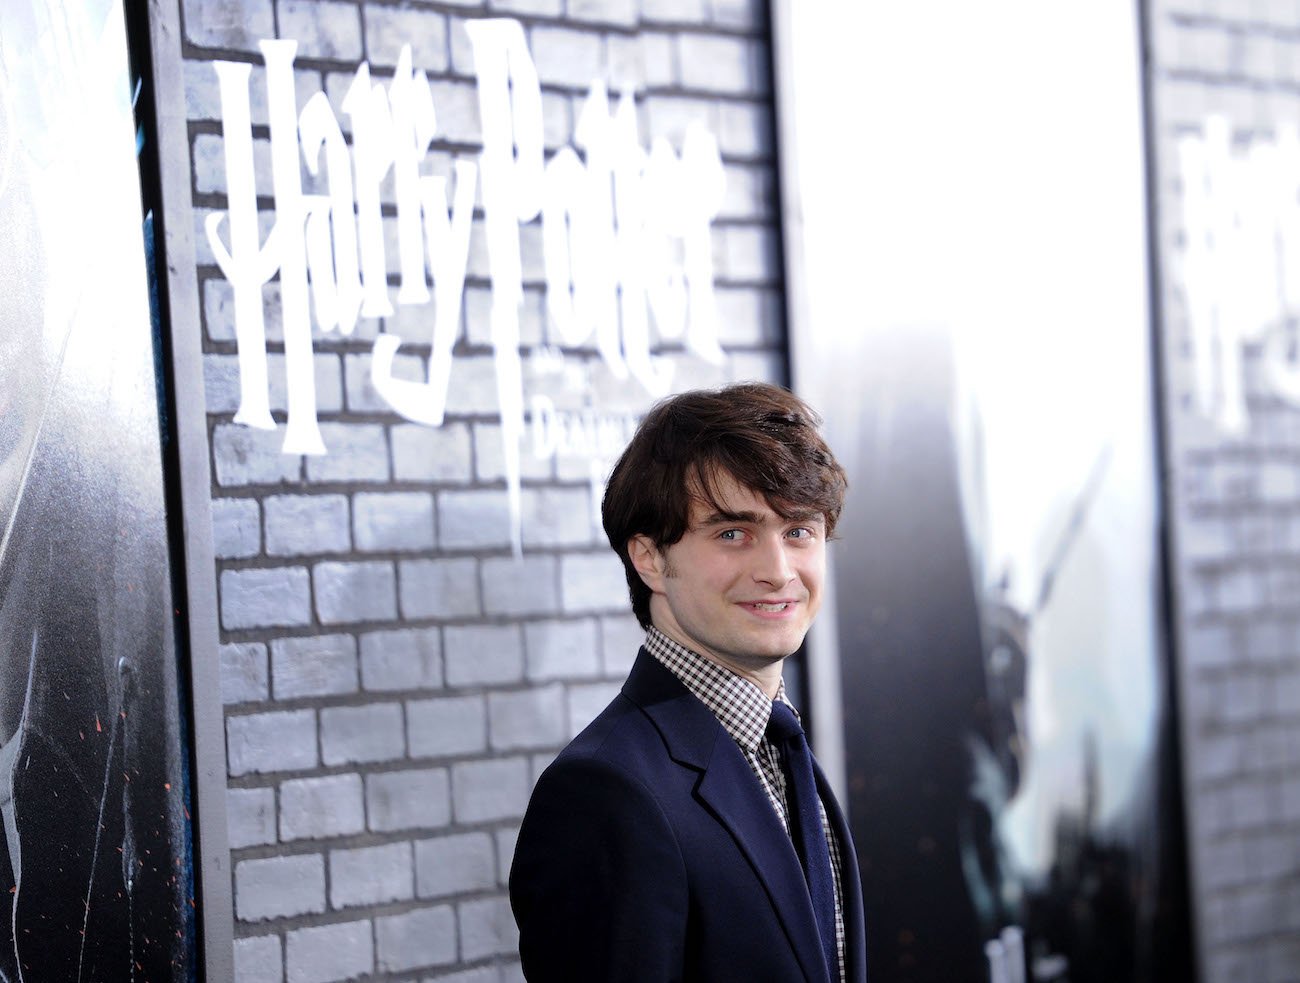 'Harry Potter' star Daniel Radcliffe, who's favorite joke about the films comes from 'South Park'